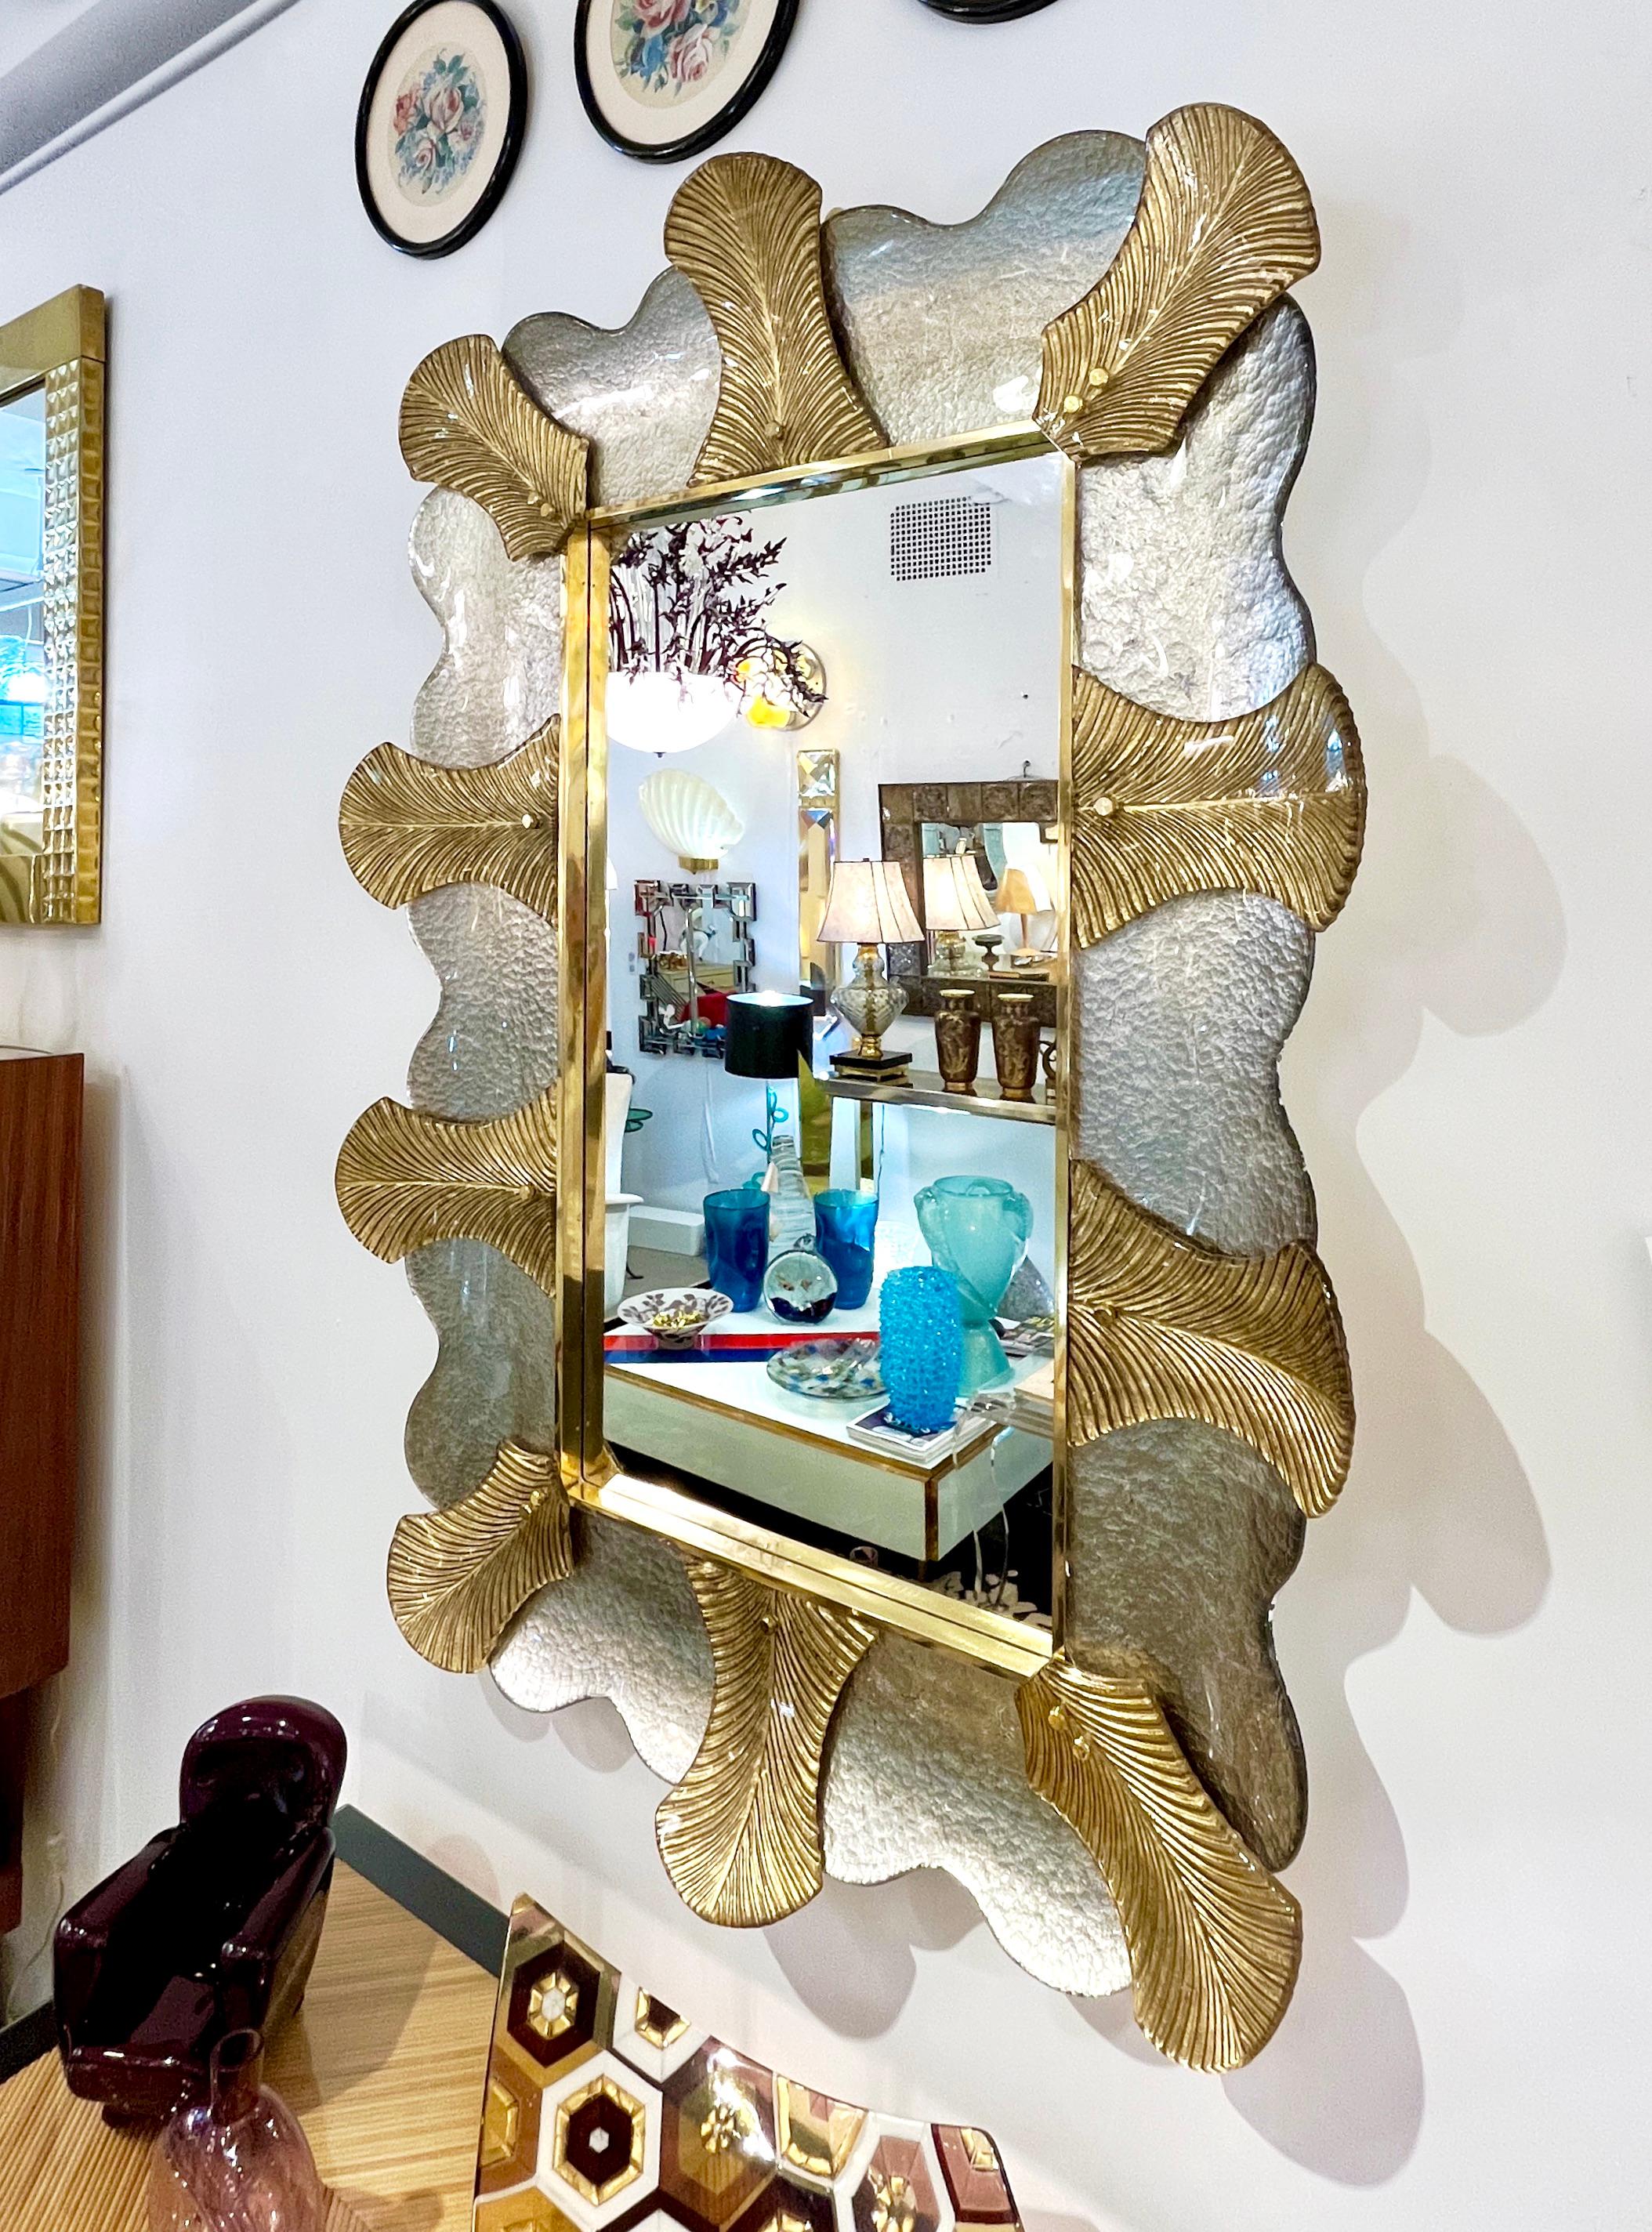 A pair is available now - Venetian contemporary Couture design rectangular wall mirrors, custom made in Italy, framed with a thick border in Art Deco Design, composed of high quality blown Murano art glass textured leaves worked with 24-karat gold